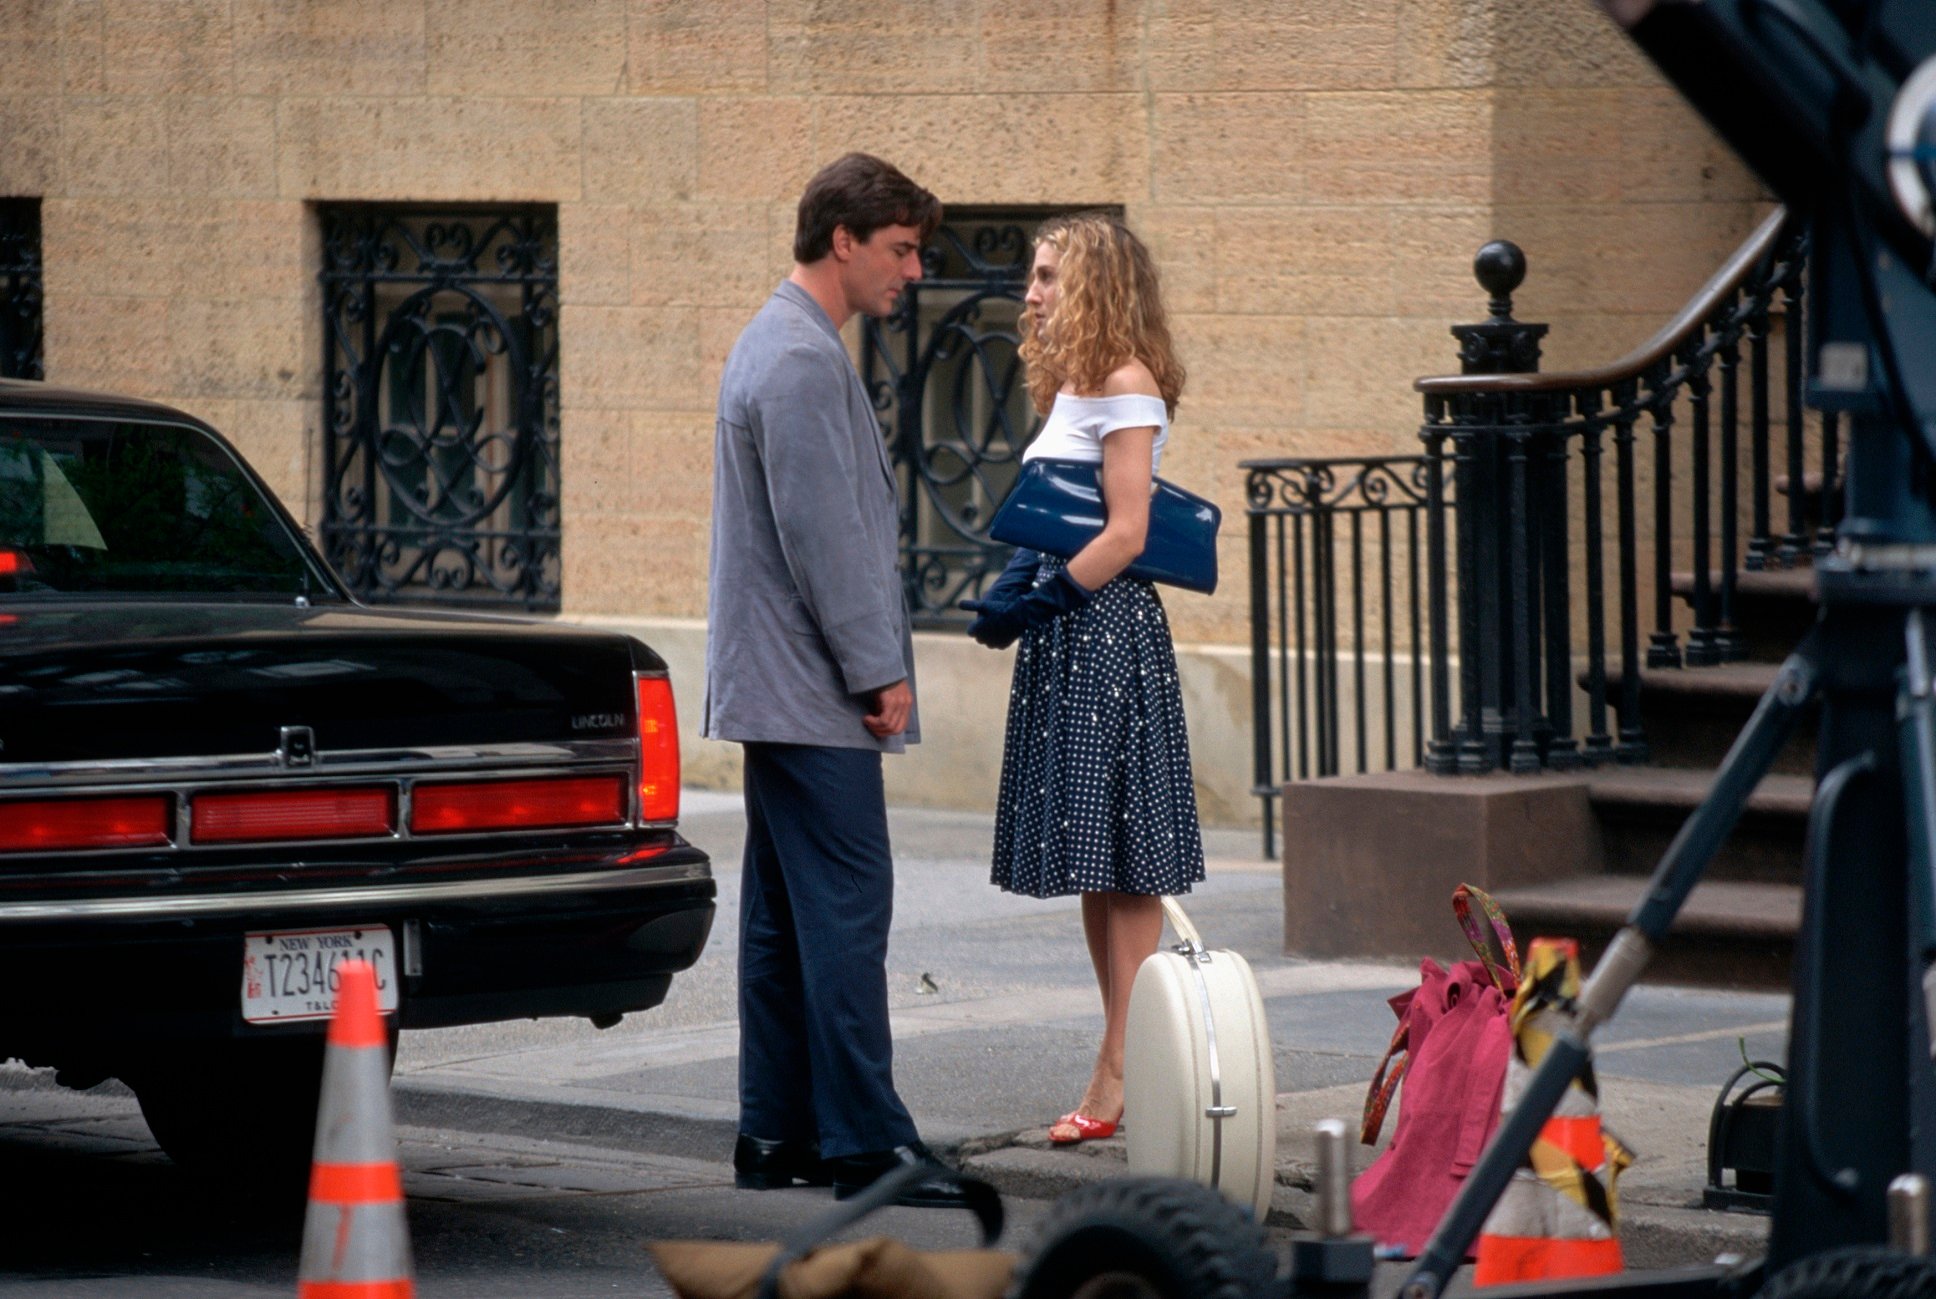 Chris Noth as Mr. Big and Sarah Jessica Parker as Carrie Bradshaw stand outside of her brownstone apartment in the season 1 finale of 'Sex and the City'